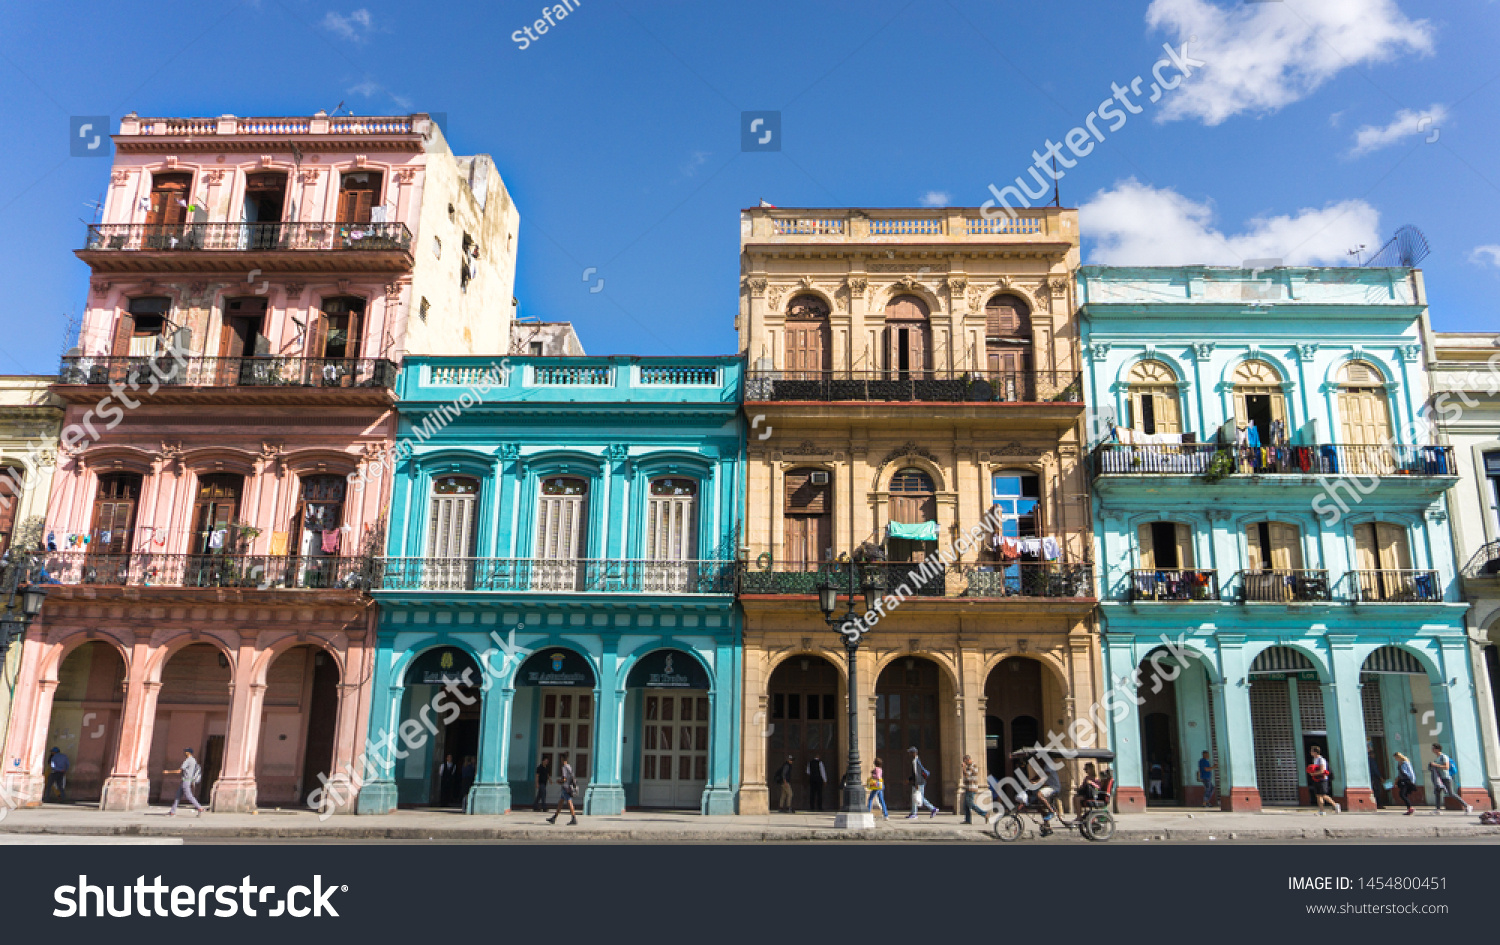 Cubadecember 2017 Street View Colonial Stock Photo Now) 1454800451